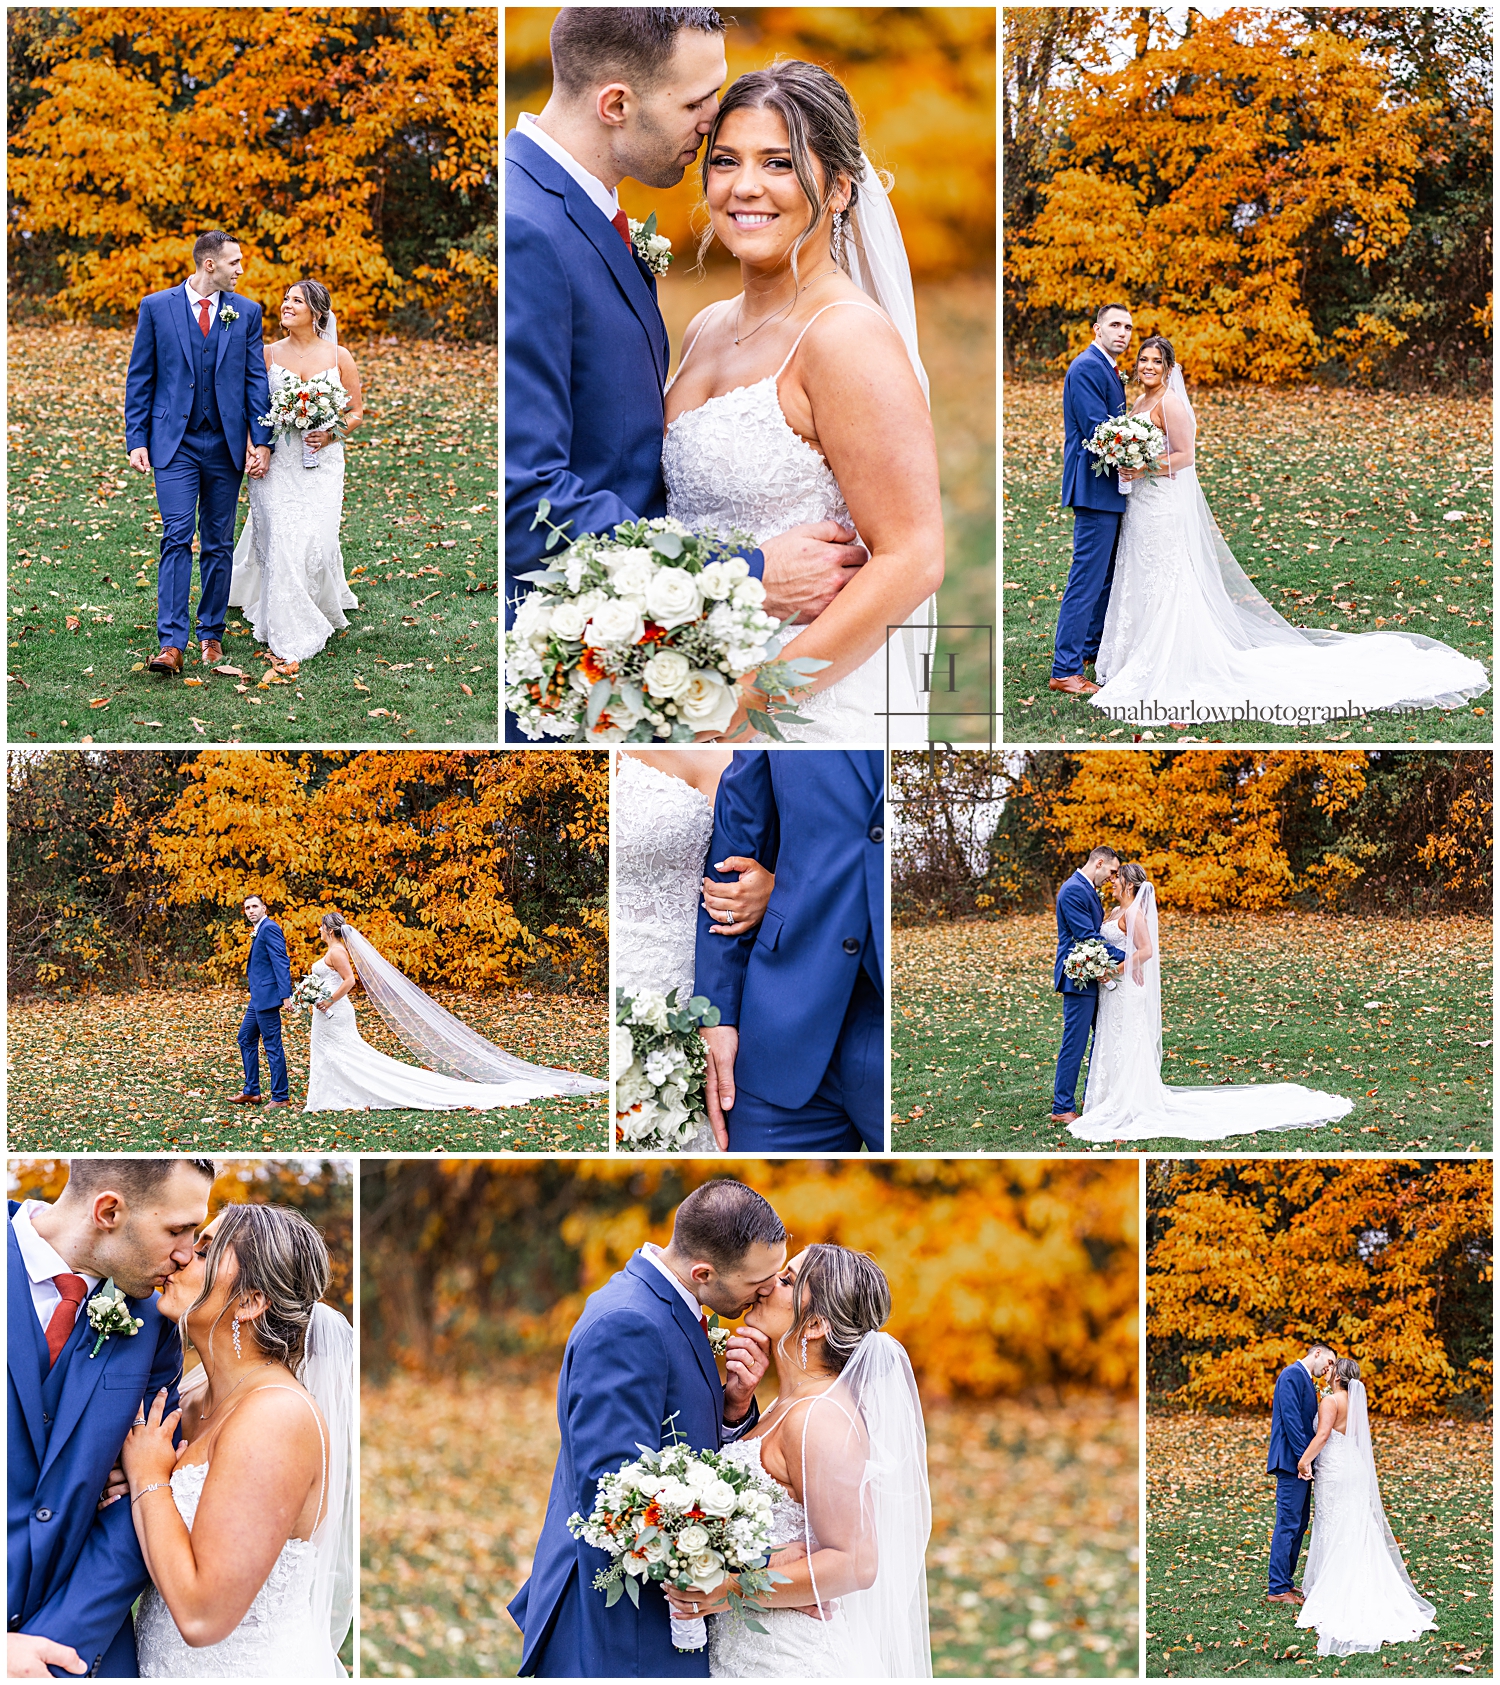 Bride and groom pose for wedding photos in green grass and orange leaves